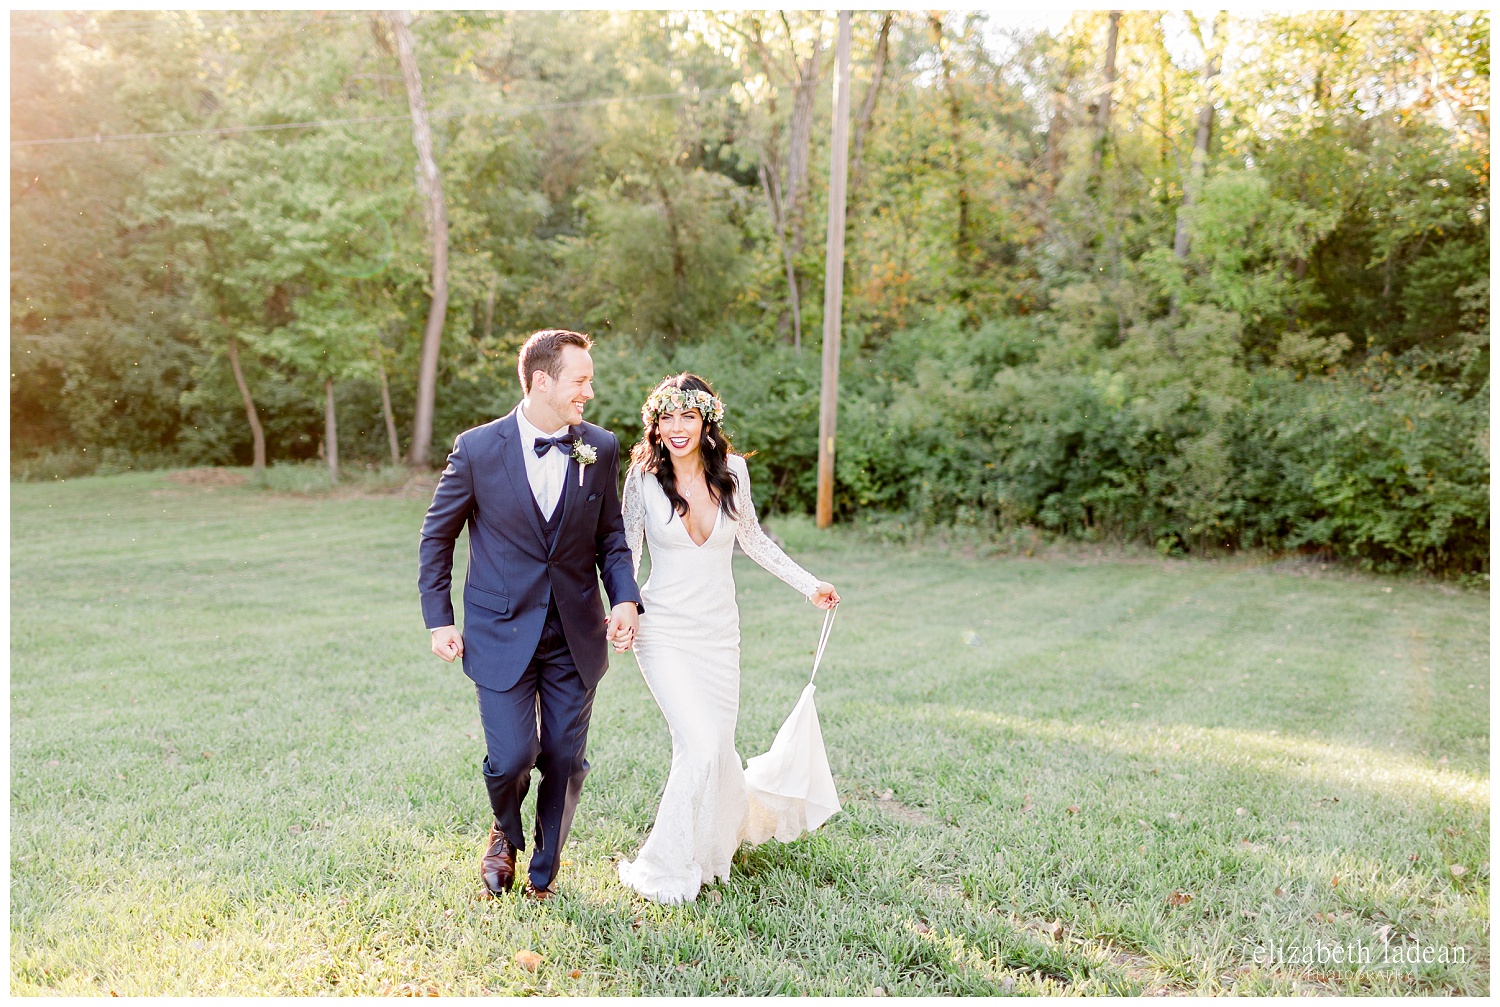 Willow-Creek-Blush-and-Blues-Outdoor-Wedding-Photography-S+Z2018-elizabeth-ladean-photography-photo_0603.jpg